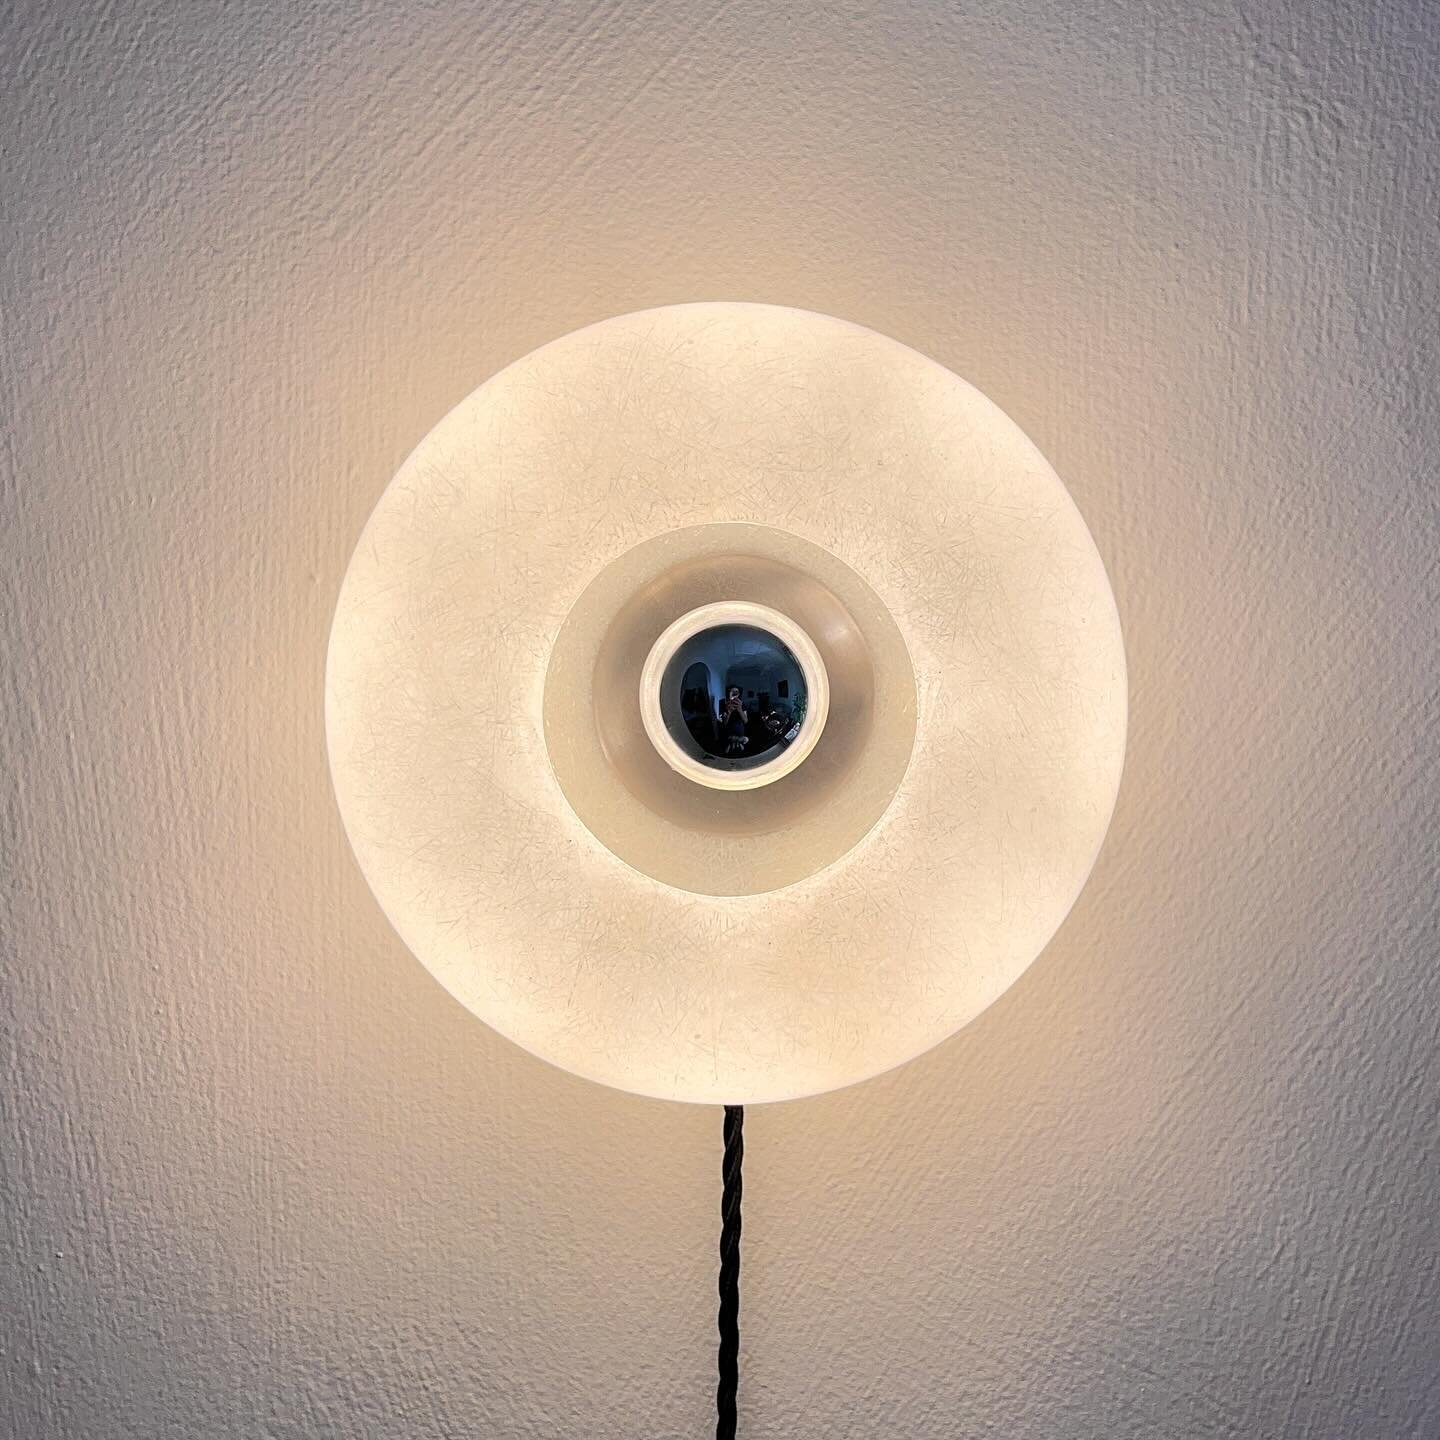 A tiny little light sculpture ~ Bump wall lamp ~ on show at @onwards.gallery.studios this weekend with a huge collection of small works from artists near and far. Come and check out all the amazing work 🤯